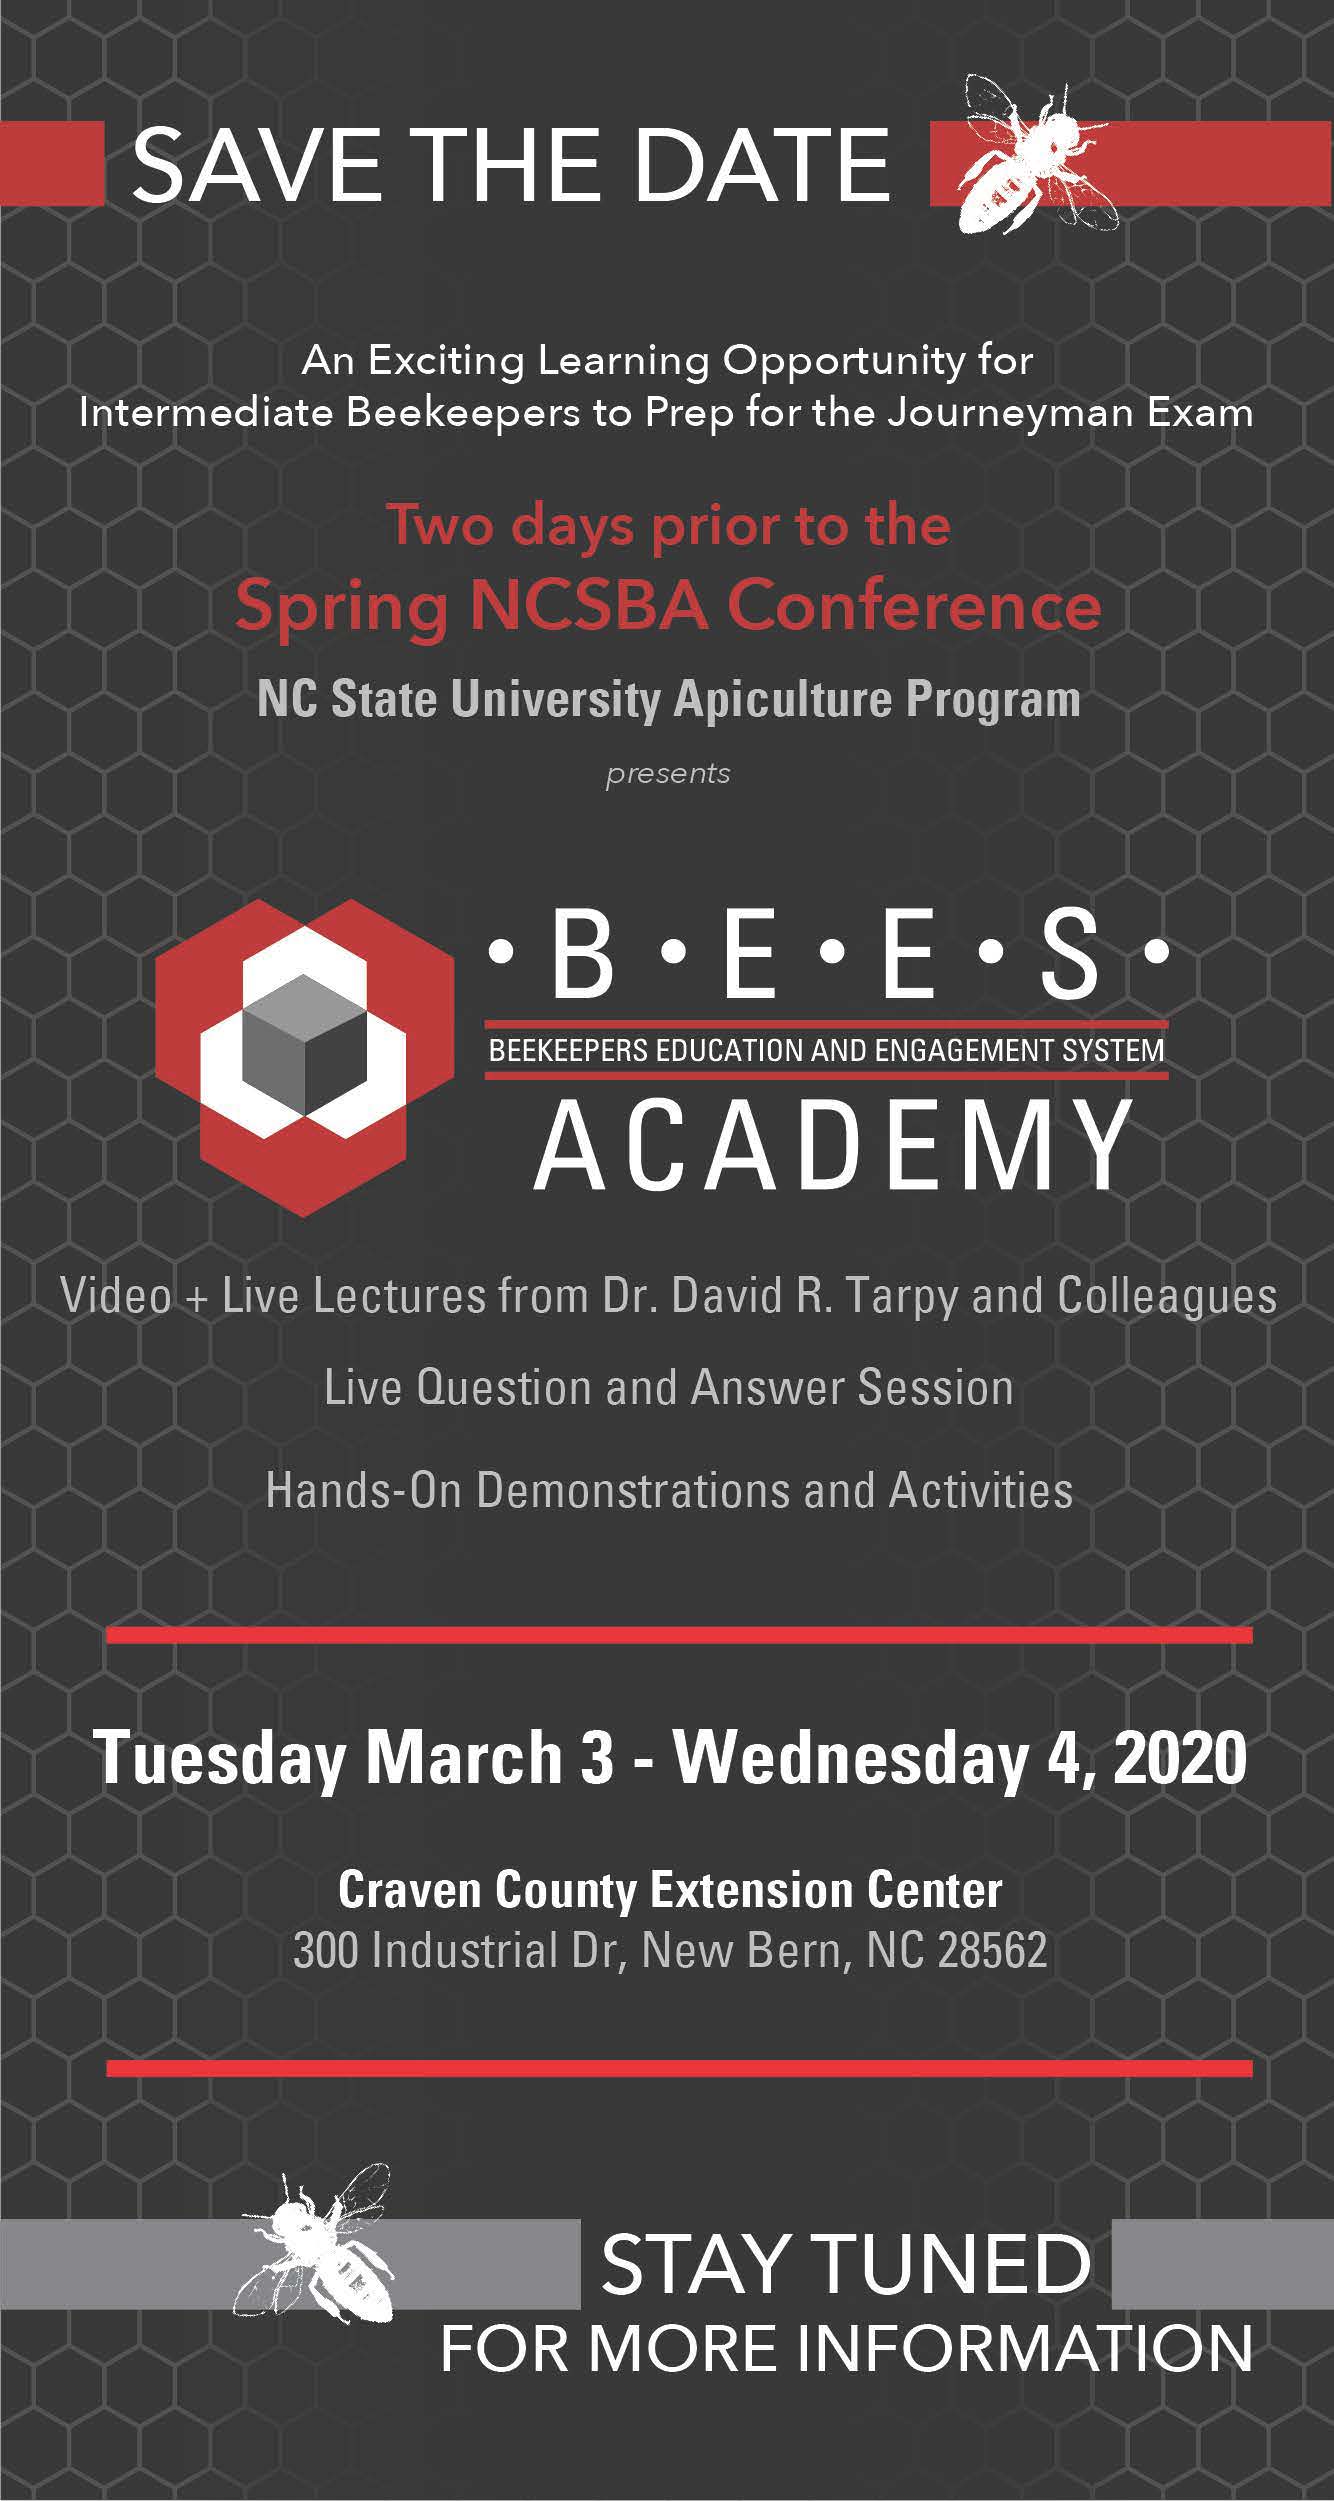 BEES Academy flyer image